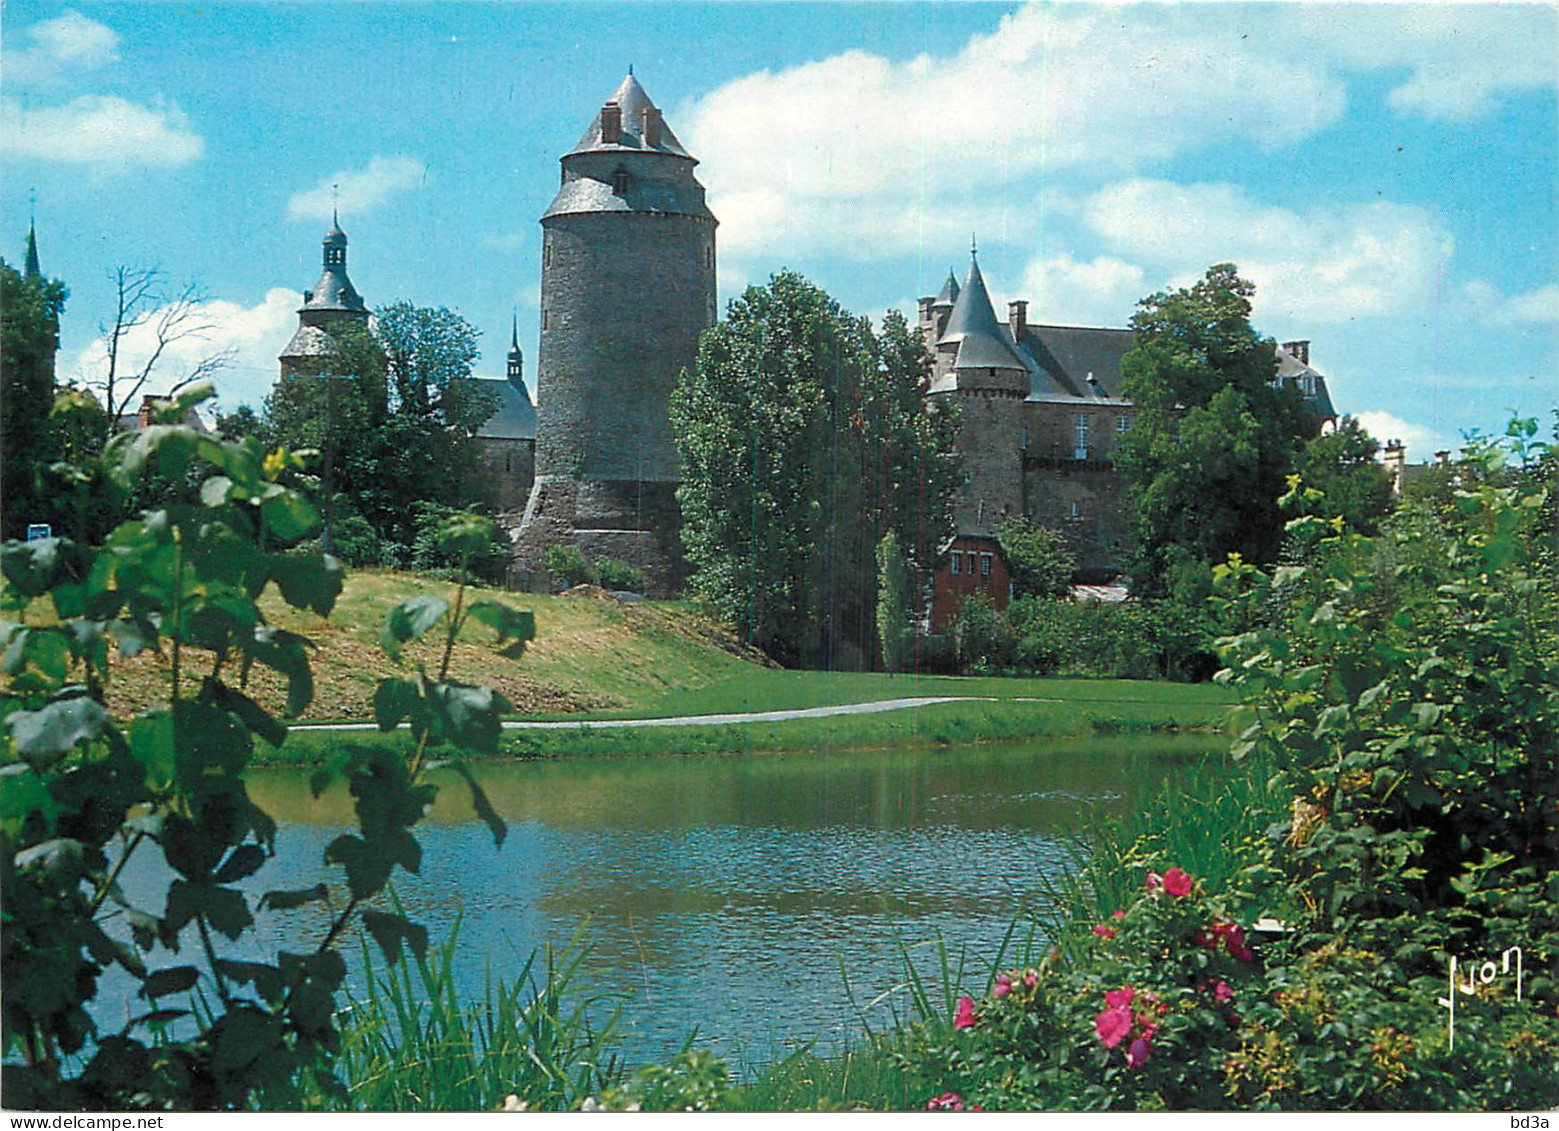 35 CHATEAUGIRON - Châteaugiron